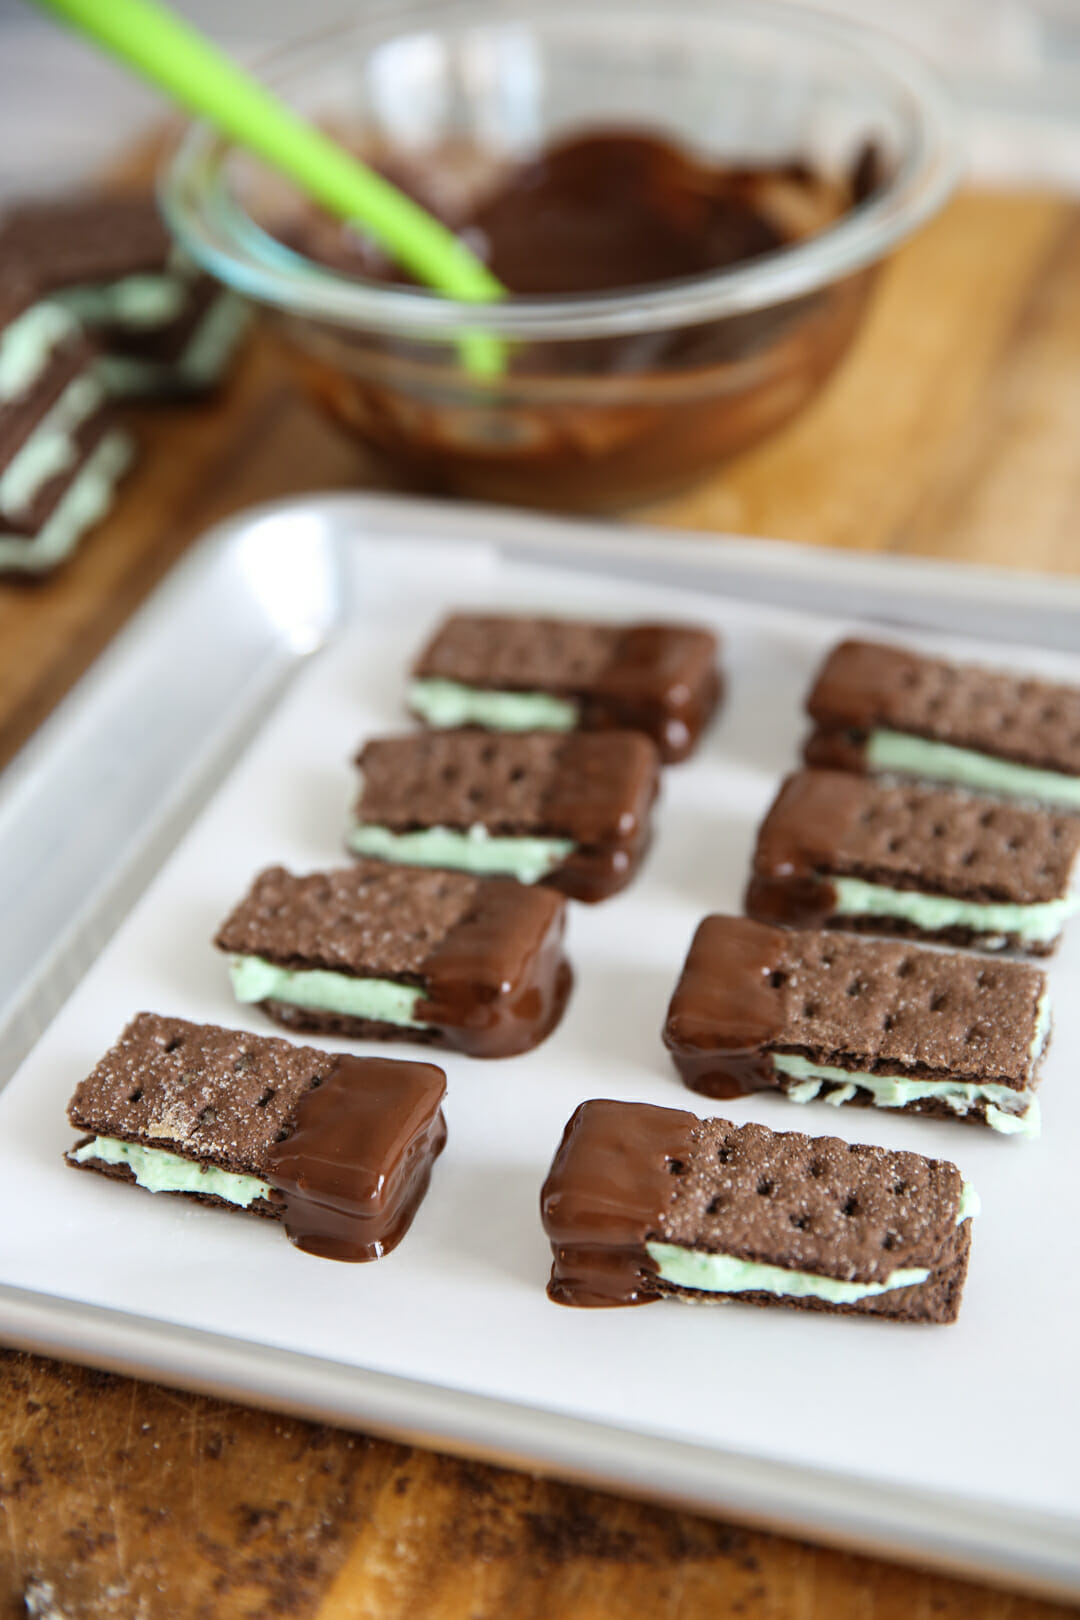 graham crackers dipped in chocolate